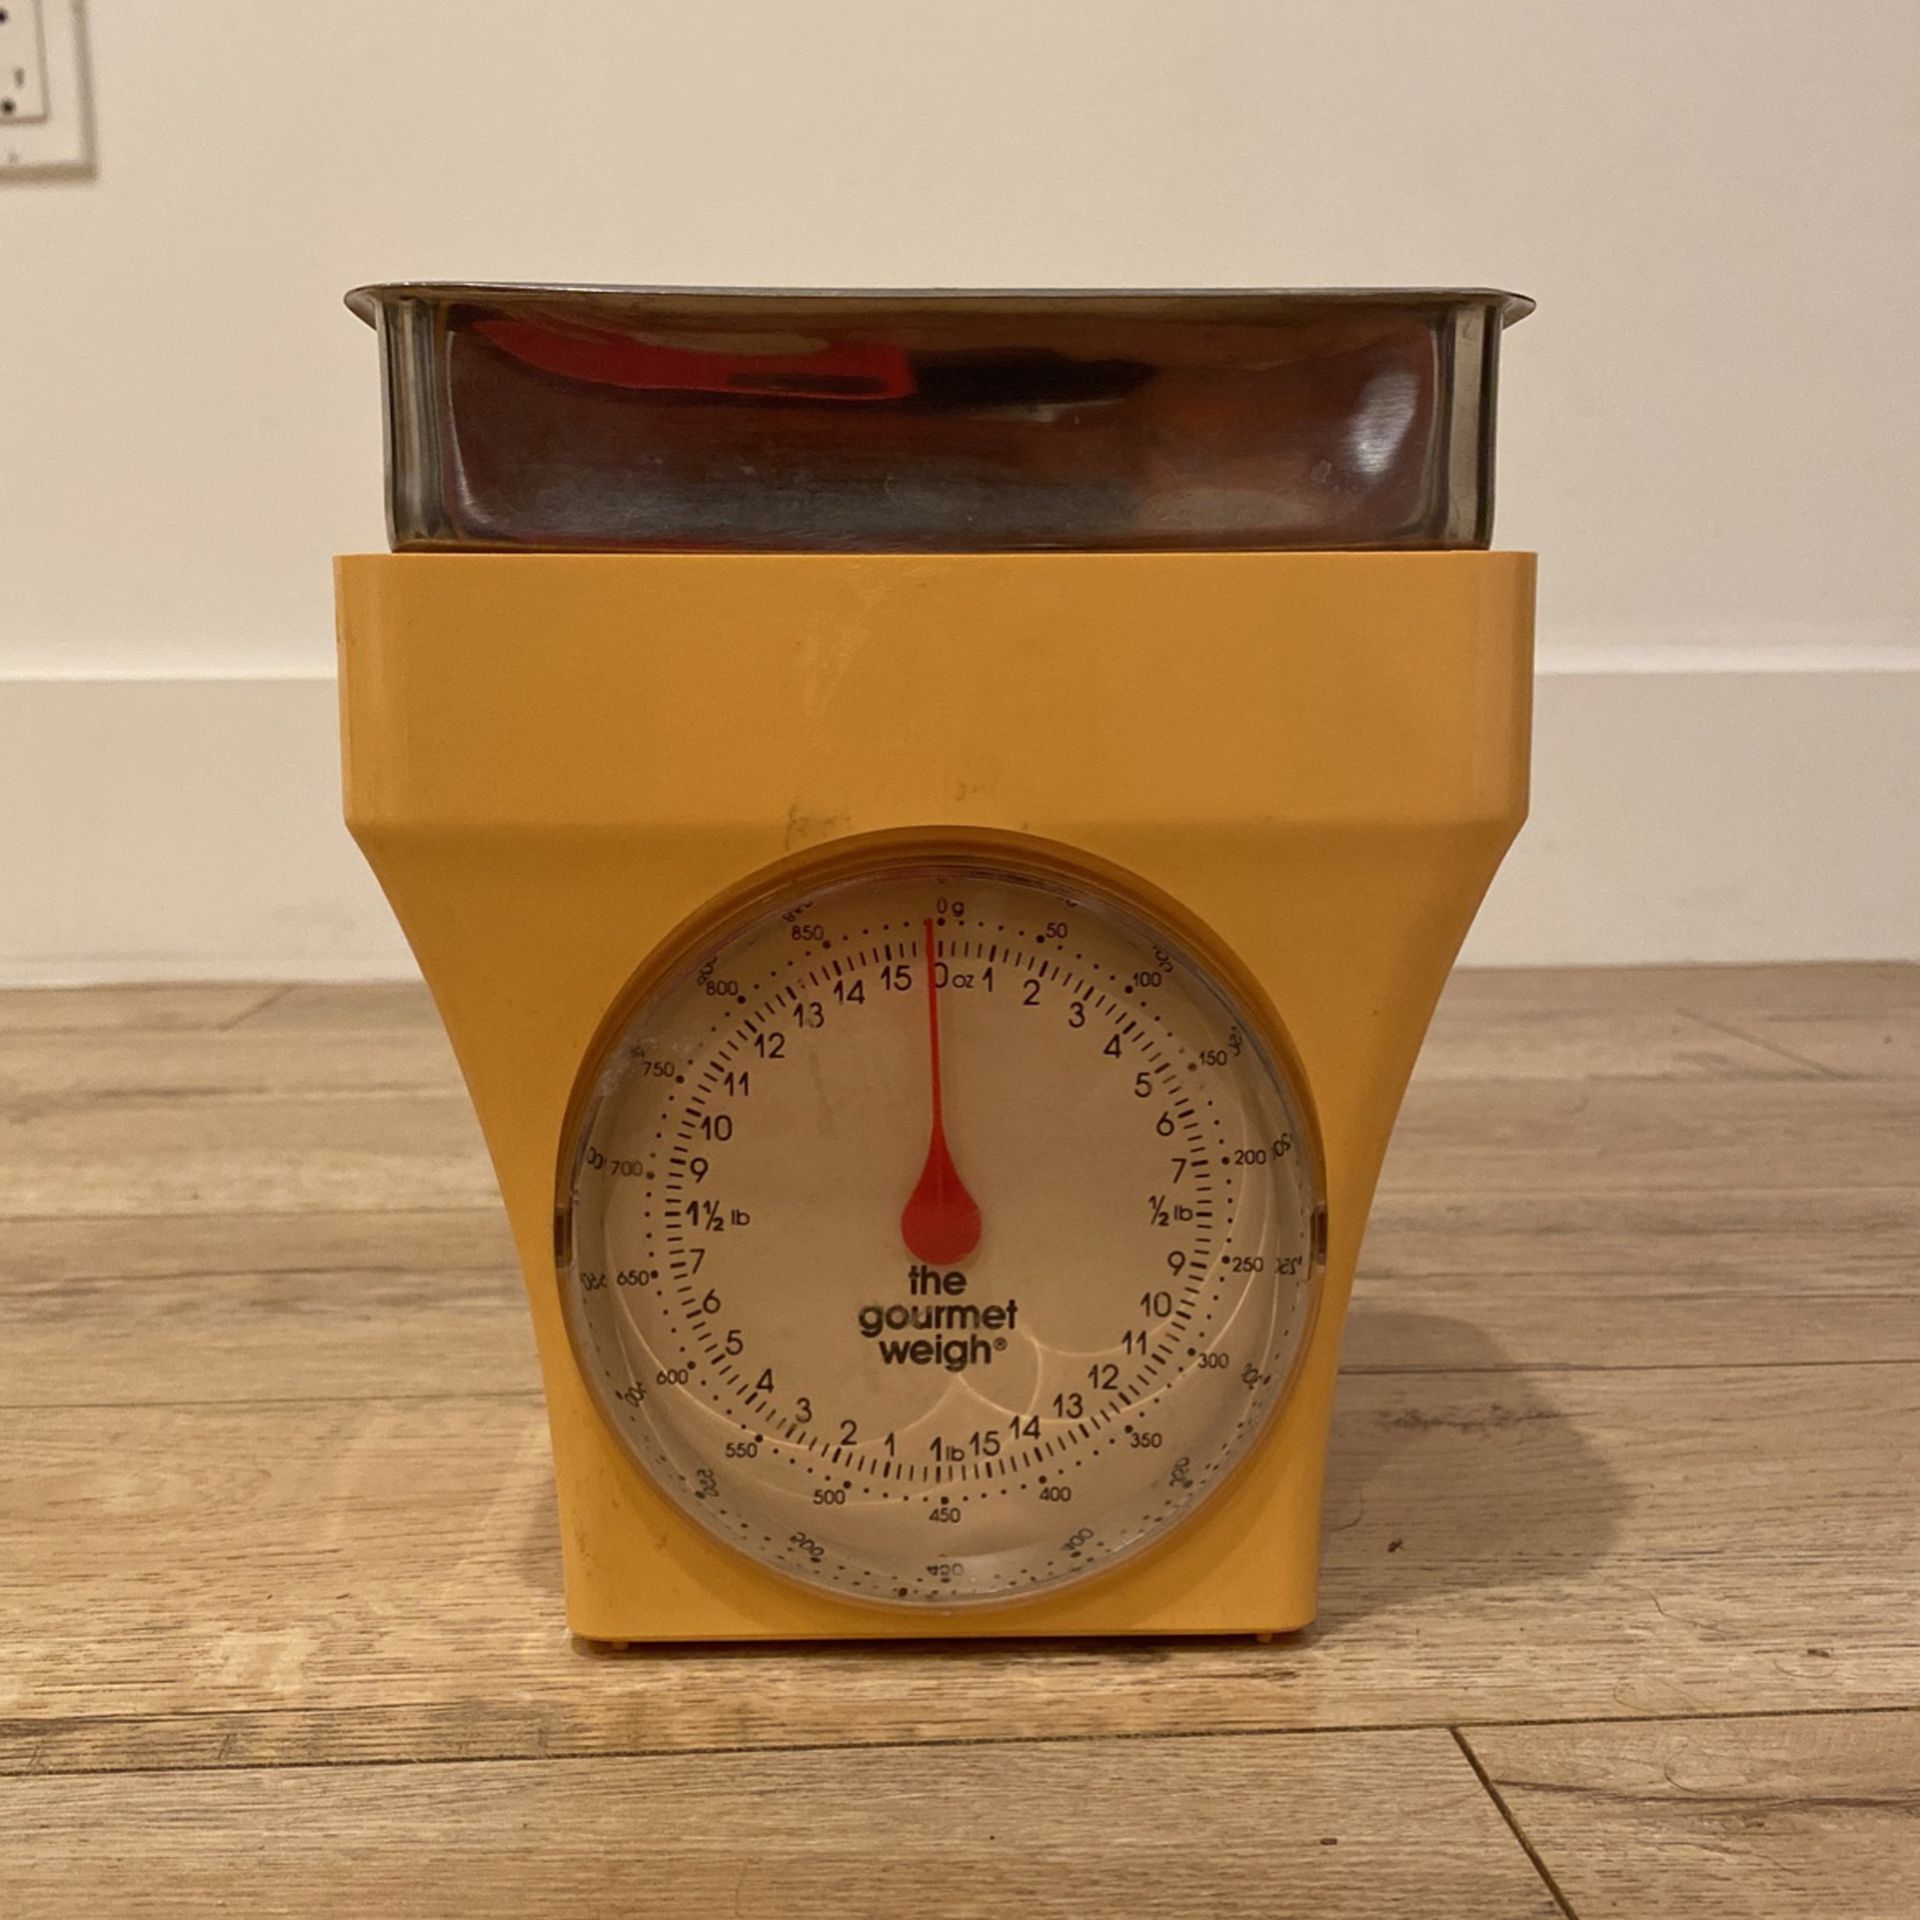 THE GOURMET WEIGH KITCHEN SCALE